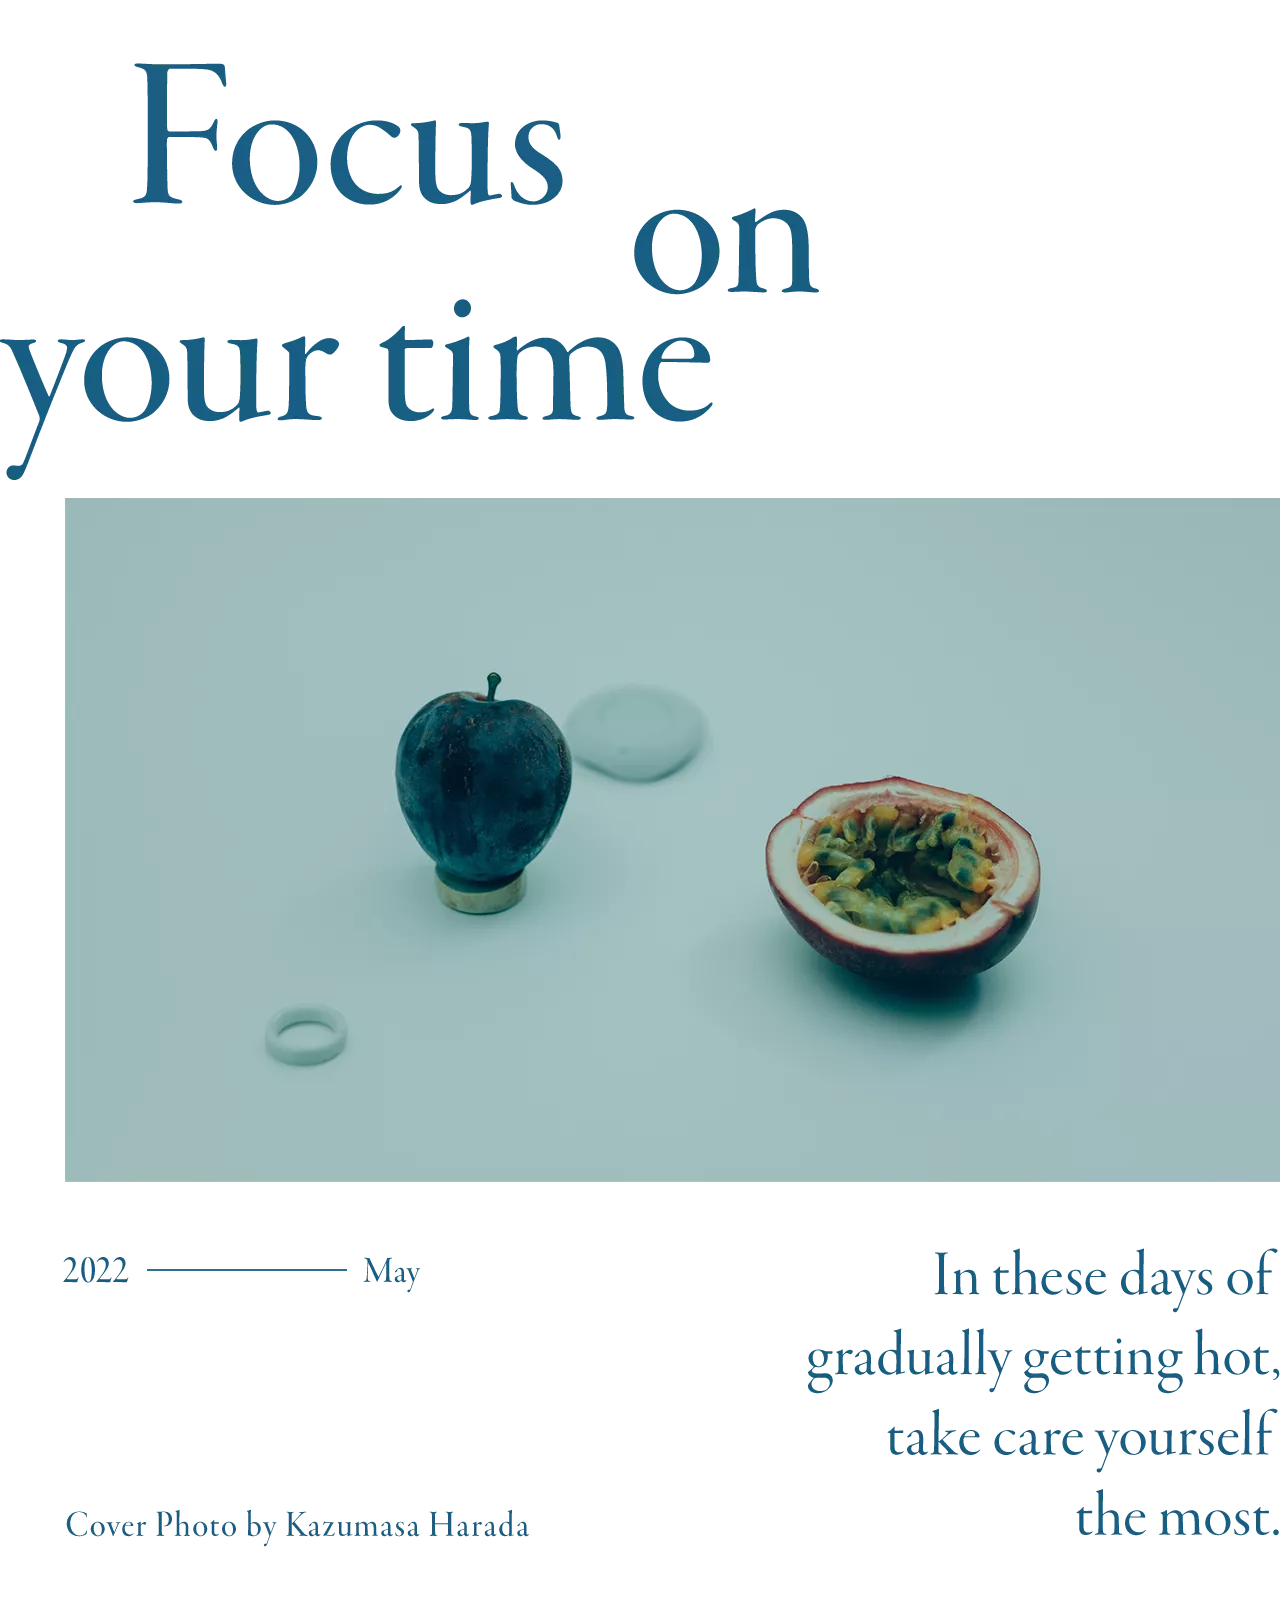 Focus on your time.